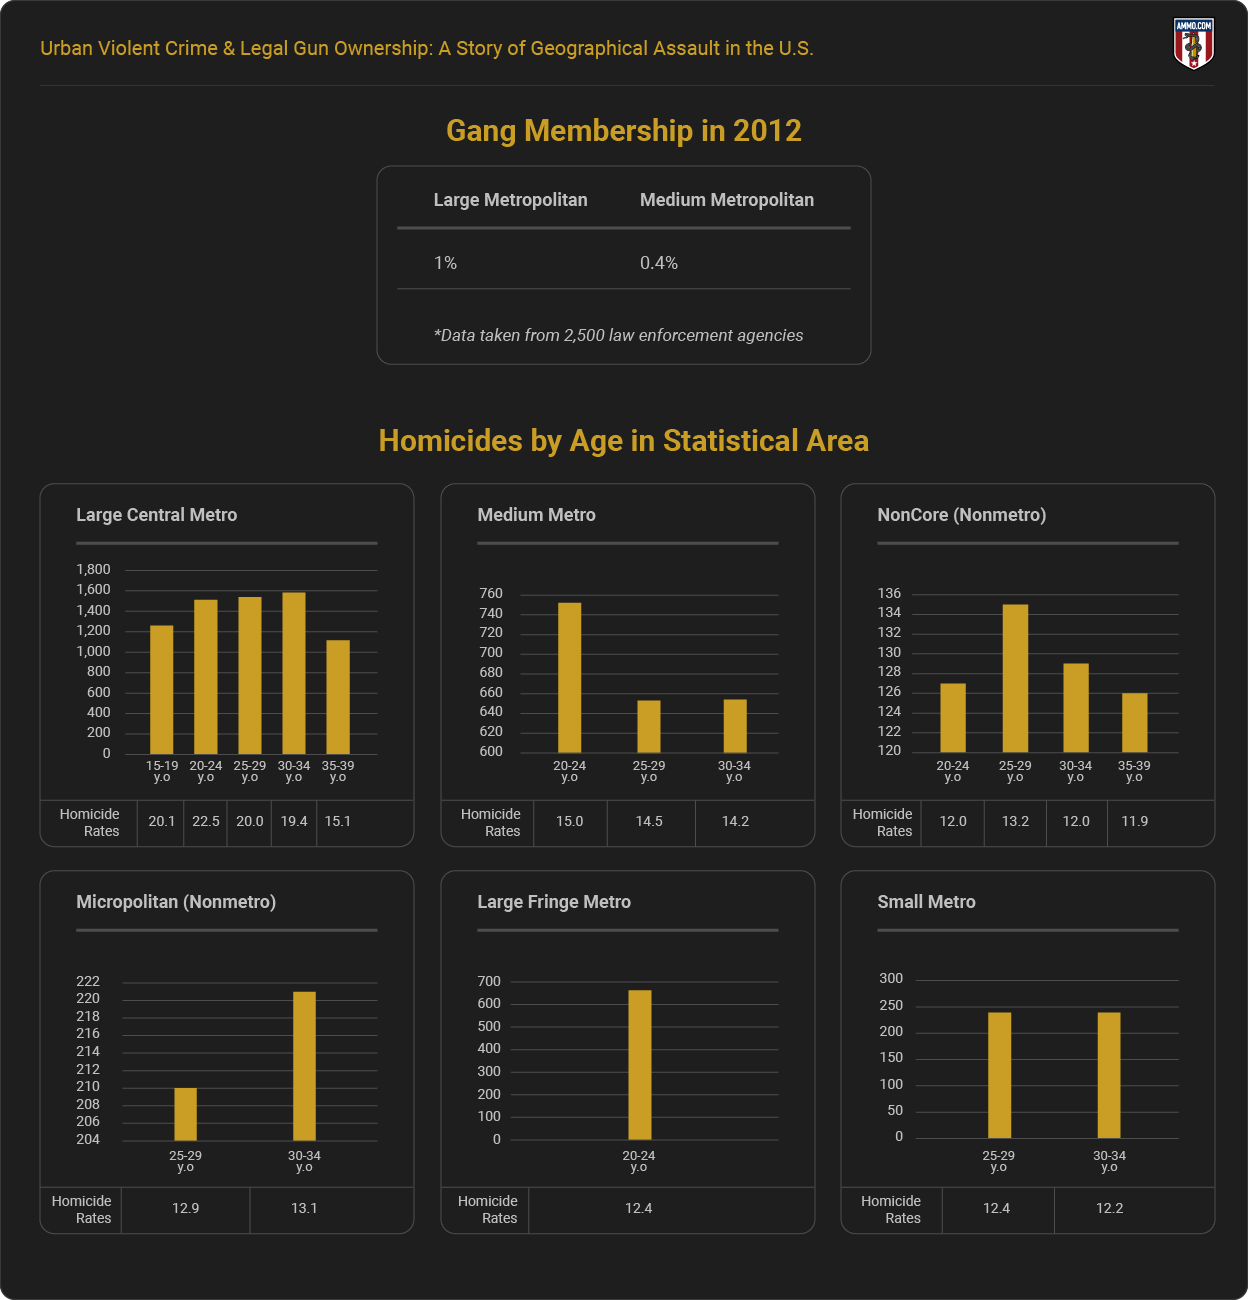 Gang Membership and Homicides by Age